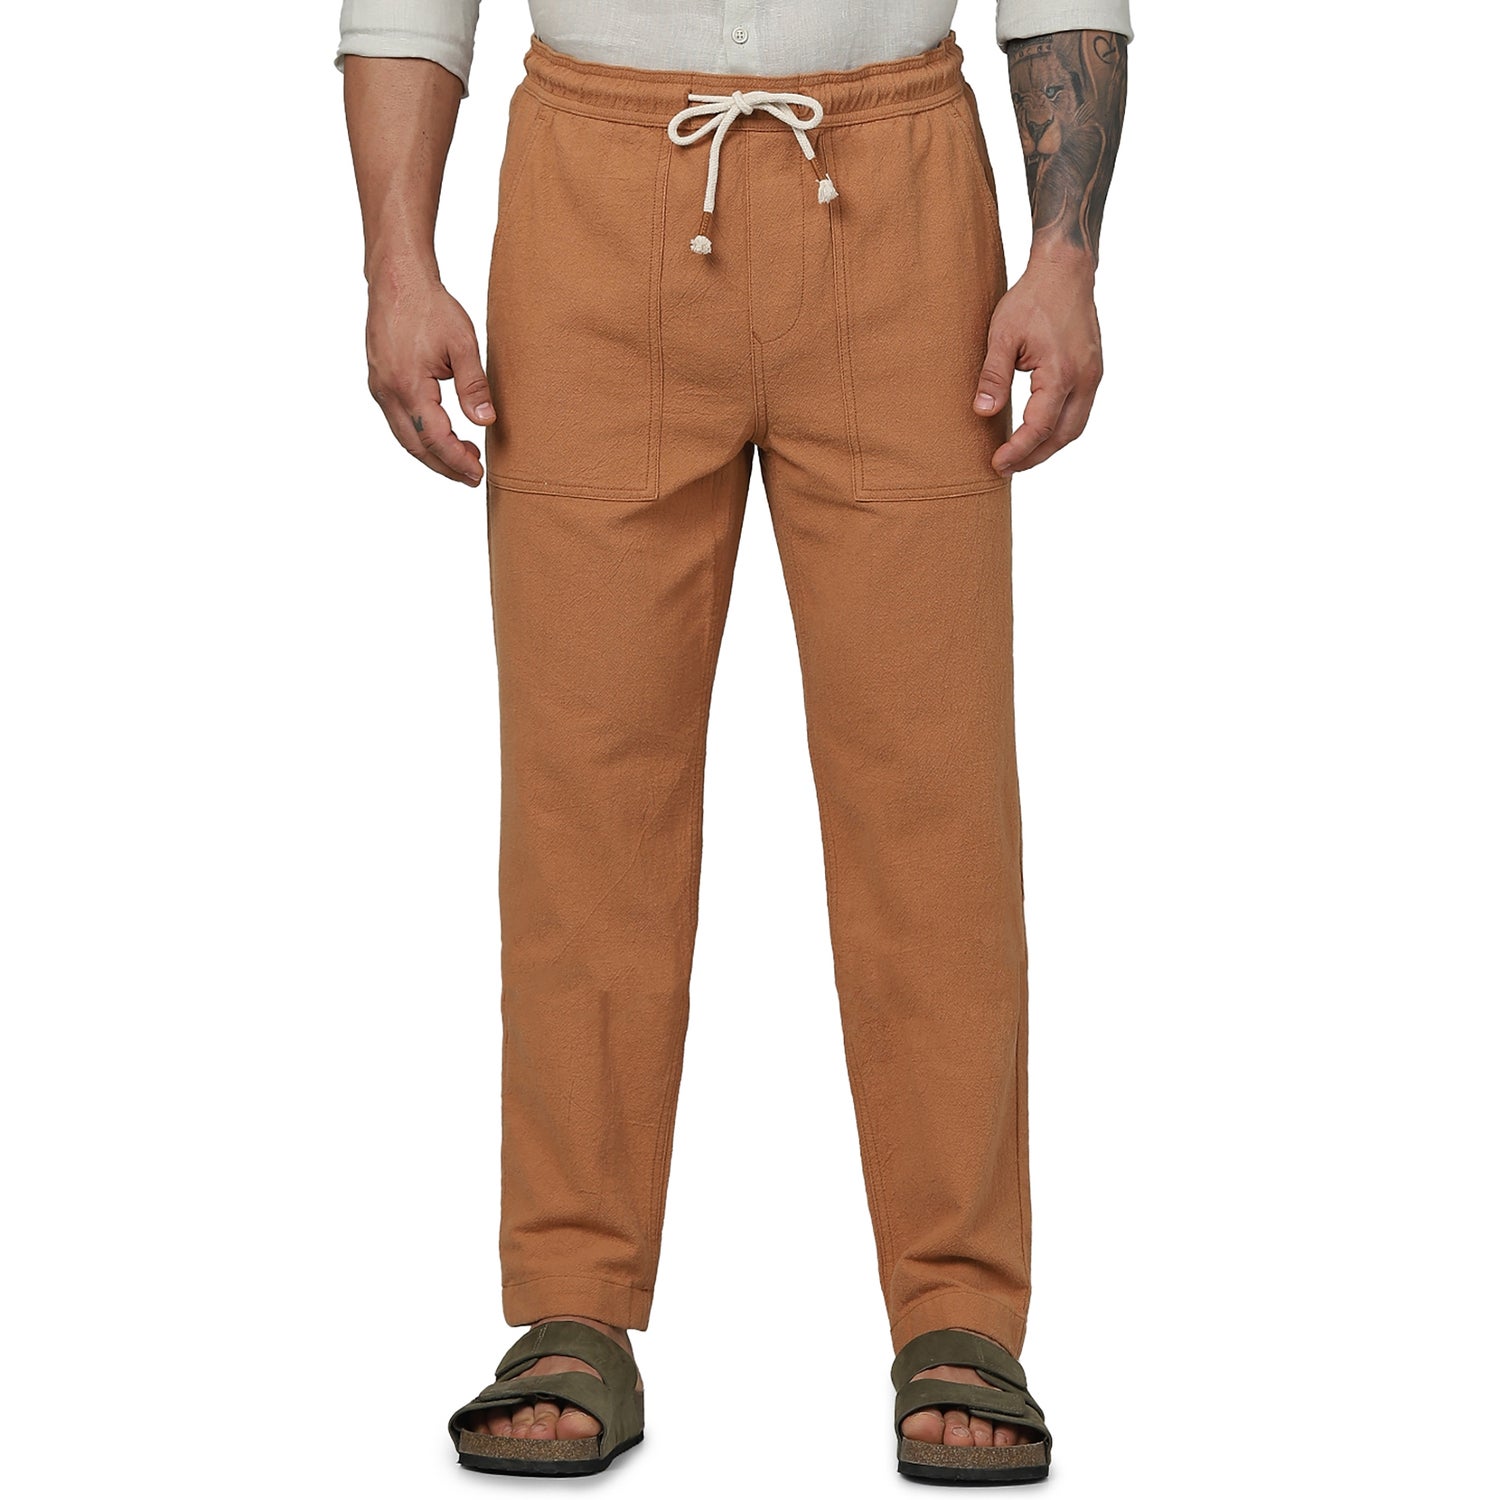 Men's Red Solid Loose Fit Cotton Fashion Jog Trousers (GODIEGO1)